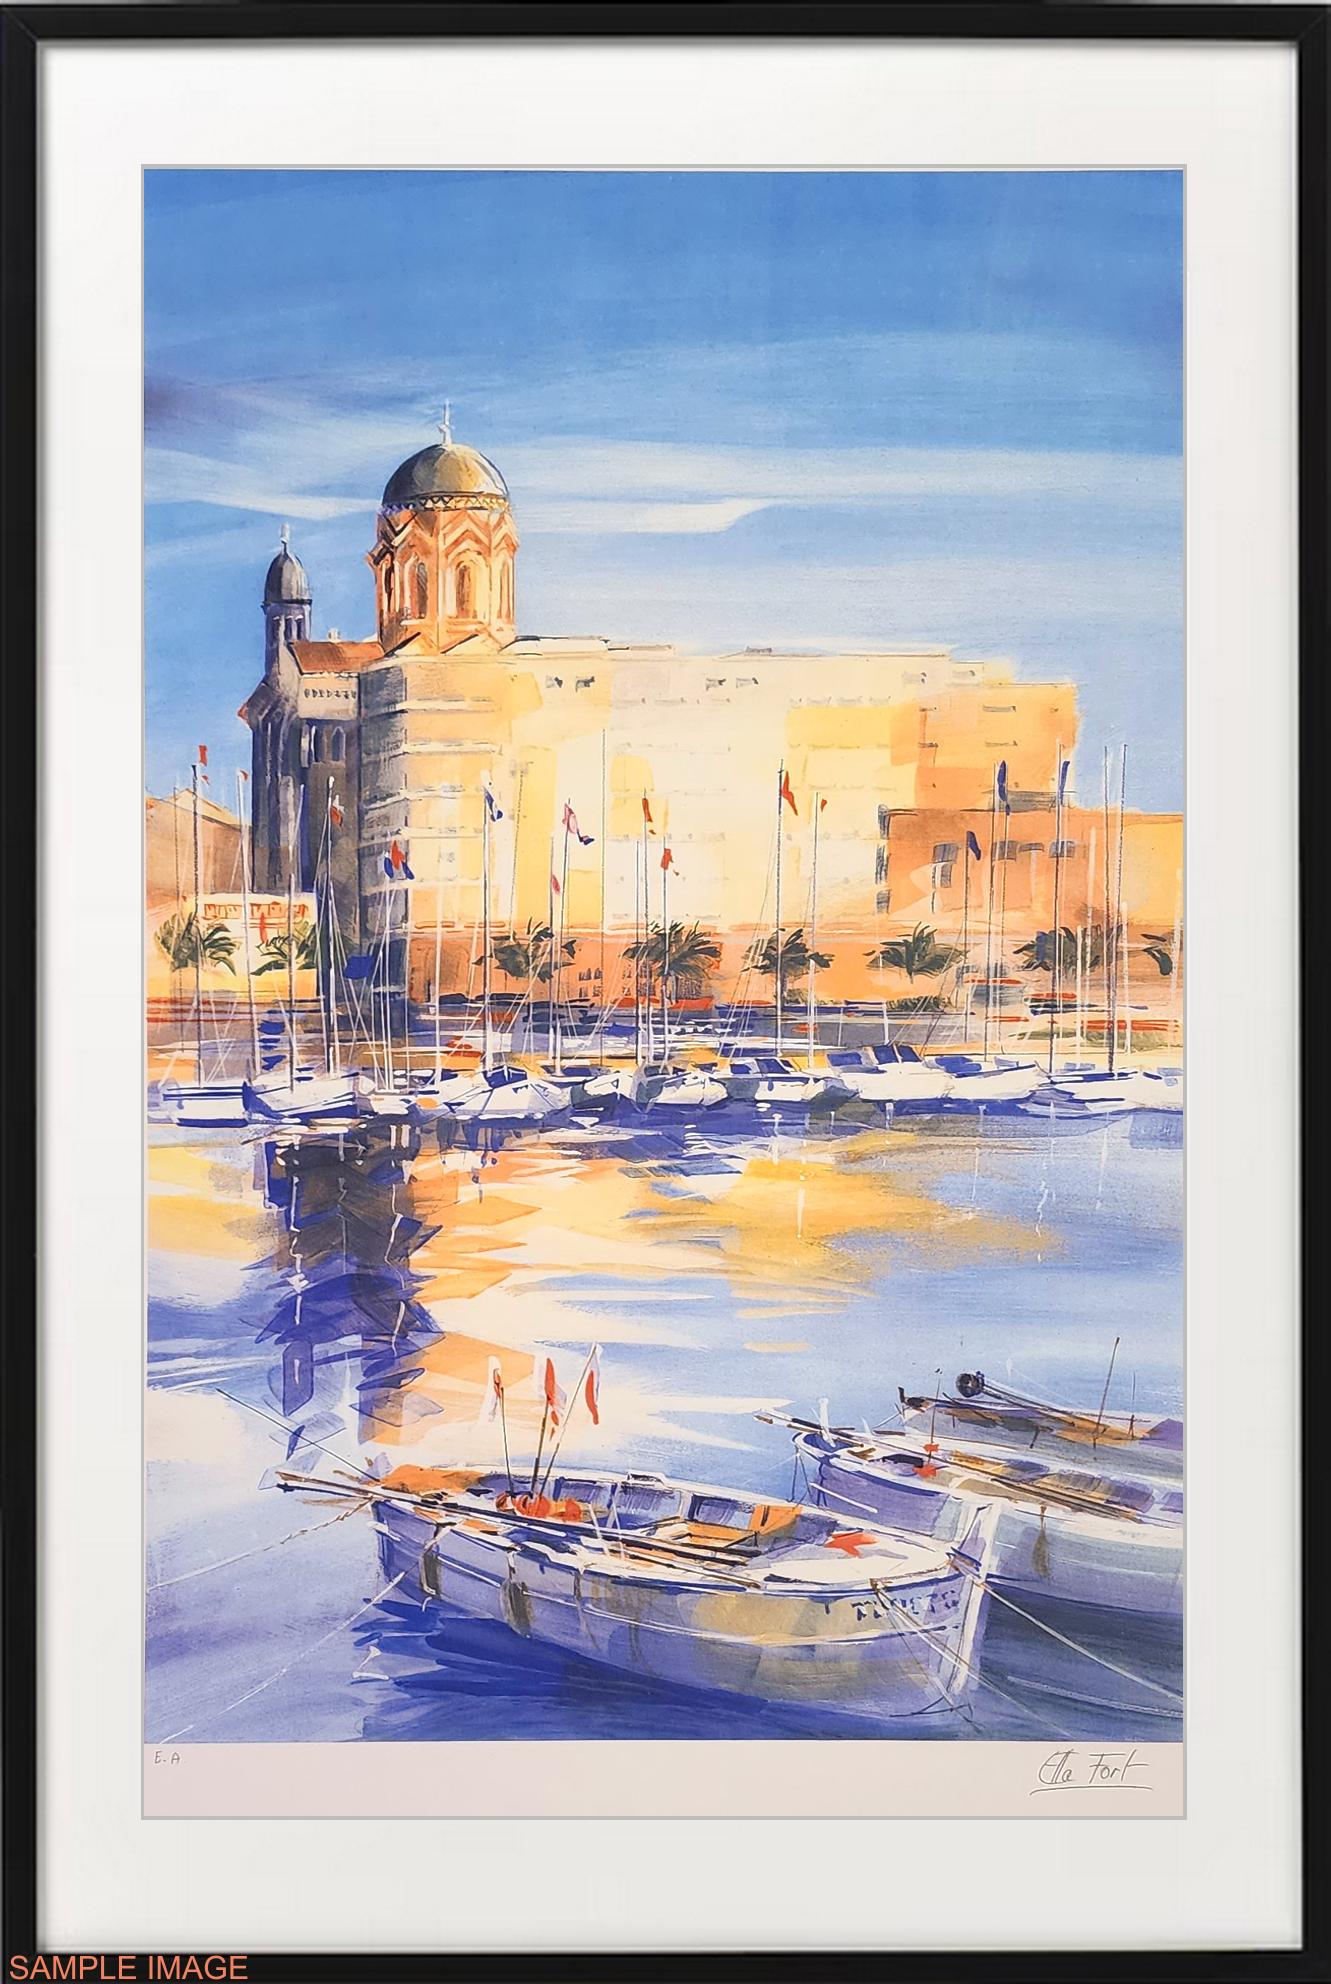 St. Raphael (Provence, seascapes, countryside art, Impressionist) - Print by Ella Fort